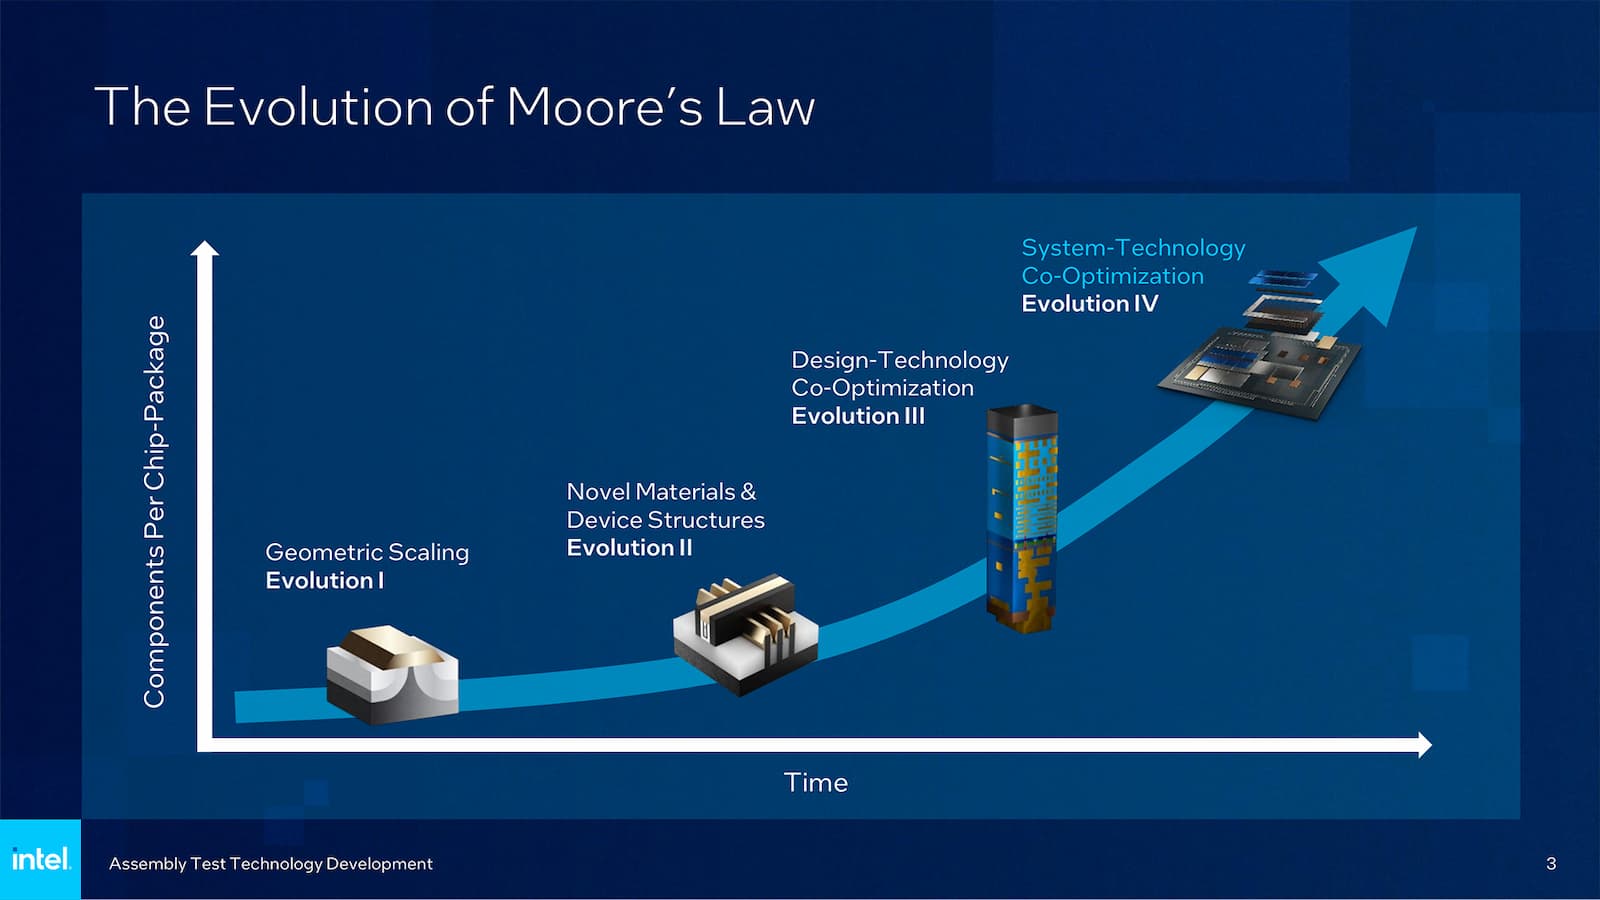 Moore's law